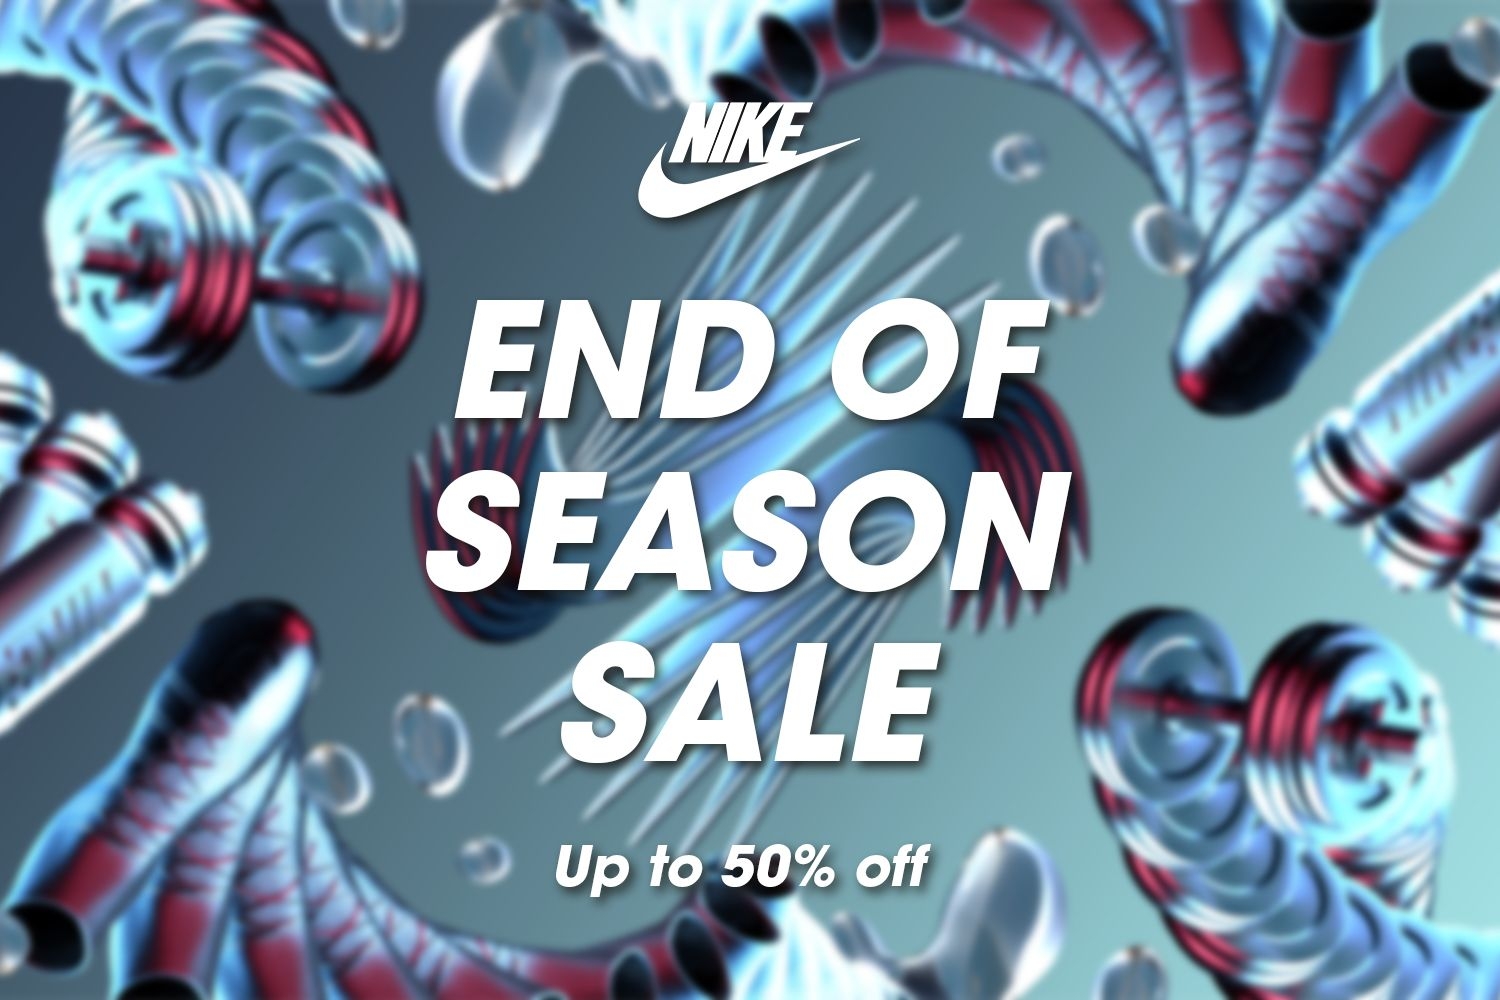 Up to 50% off at the Nike End of Season Sale